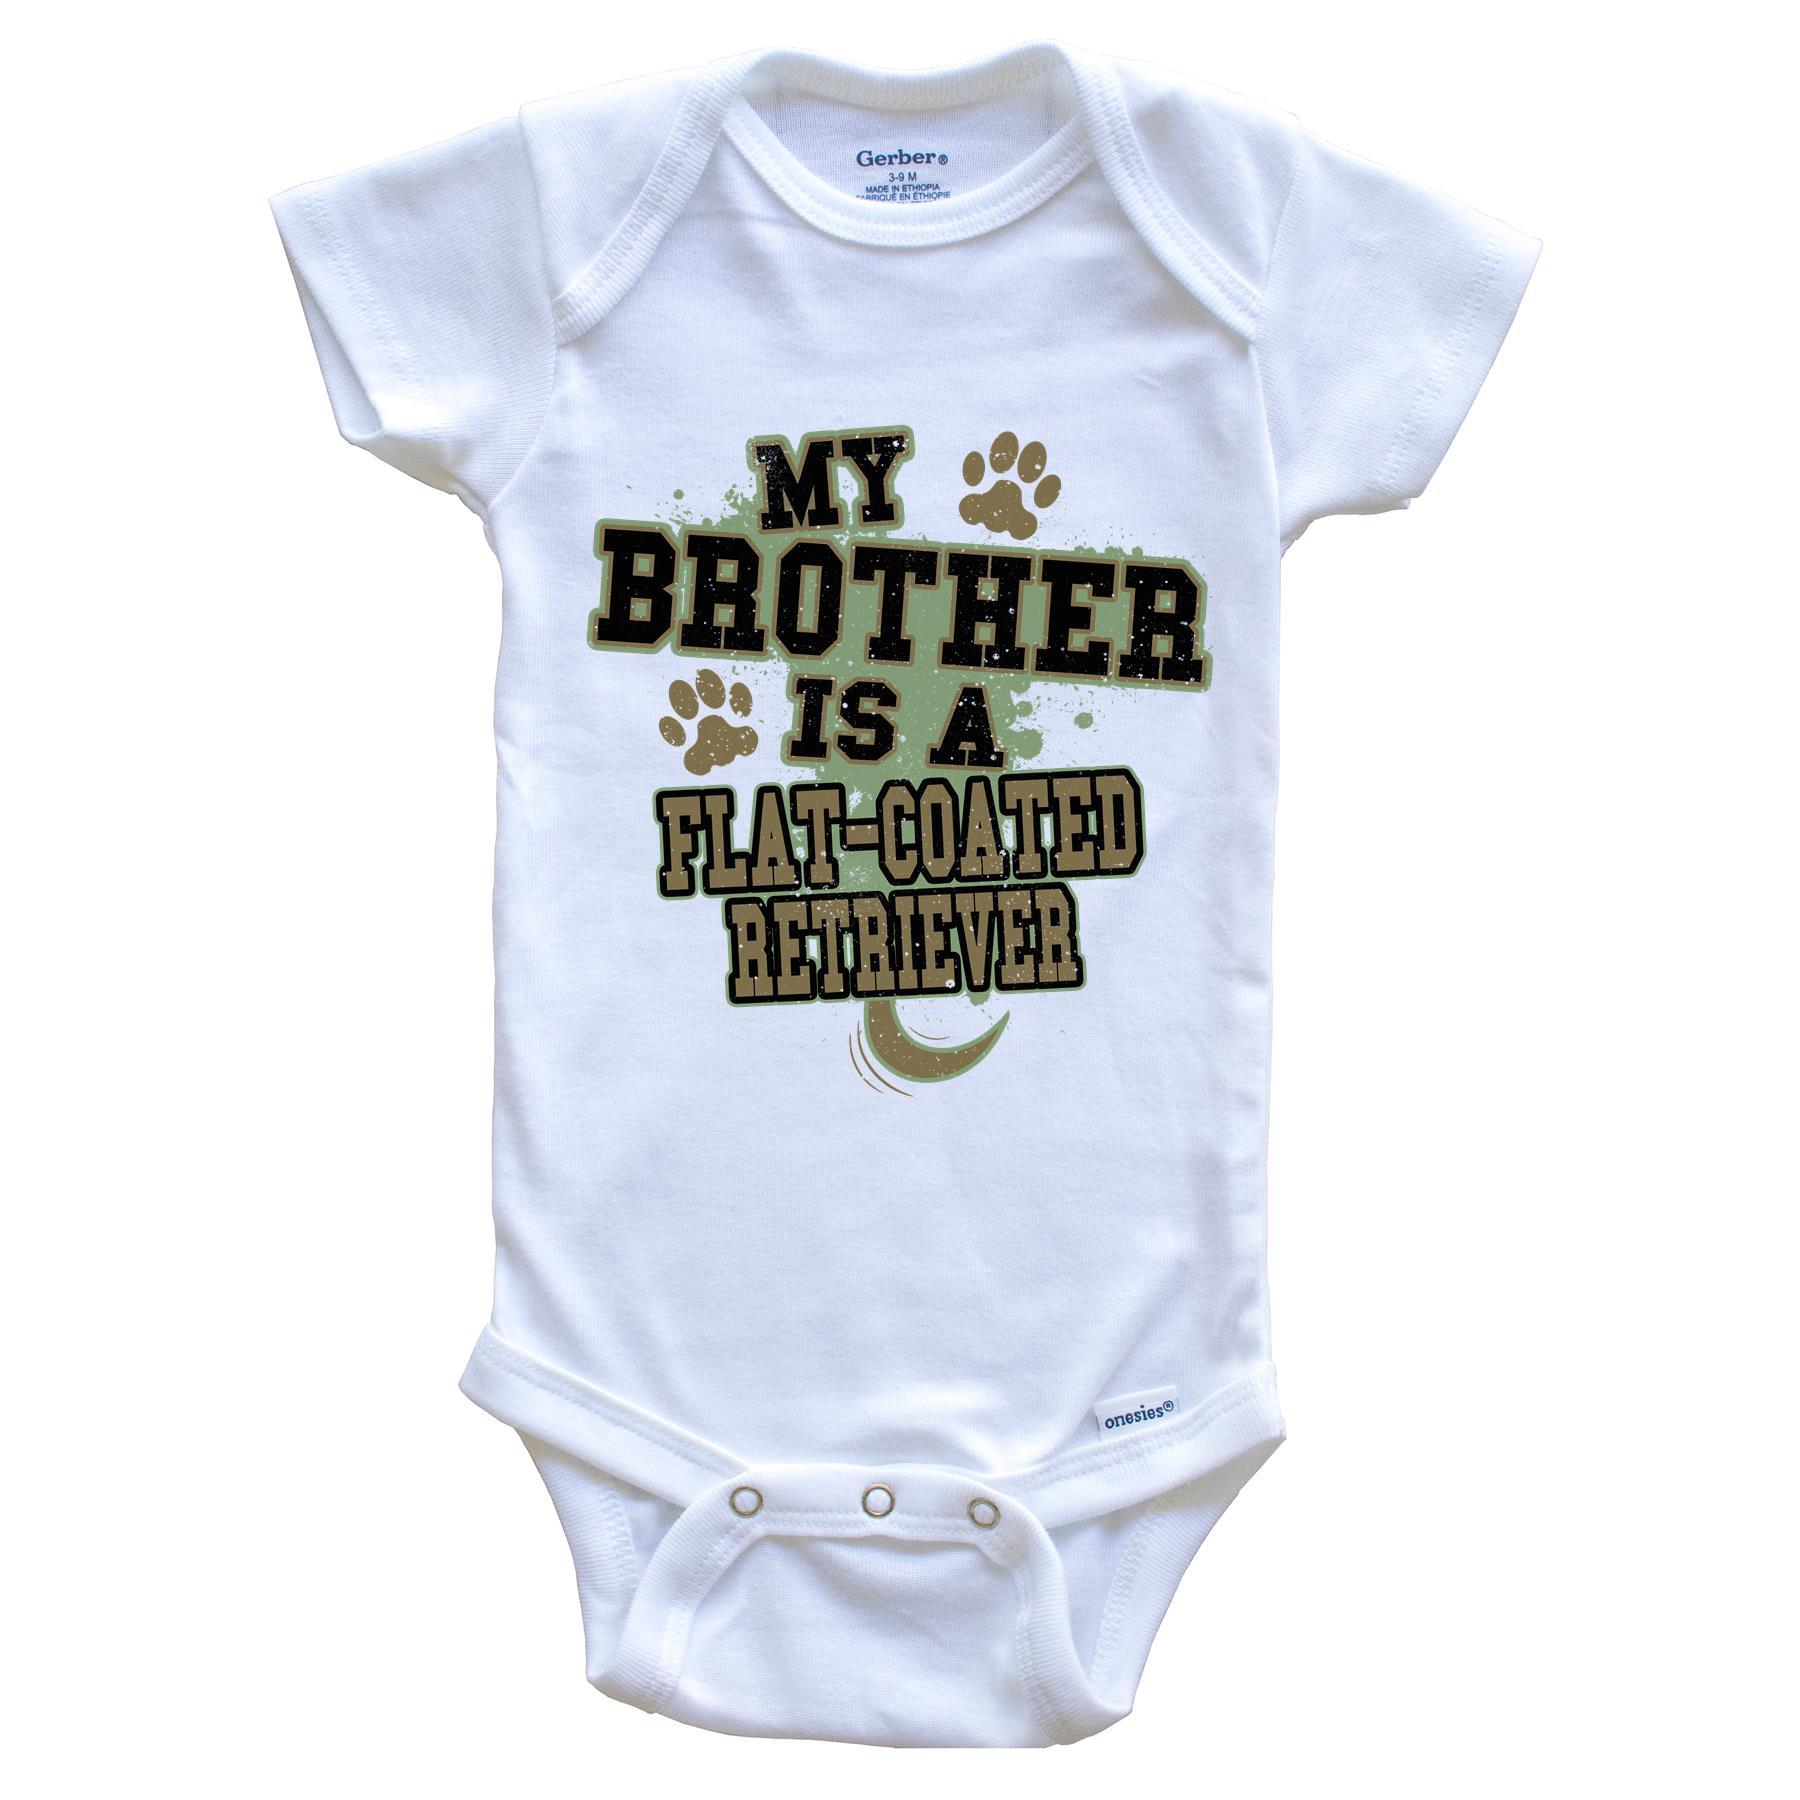 My Brother Is A Flat-Coated Retriever Funny Dog Baby Onesie